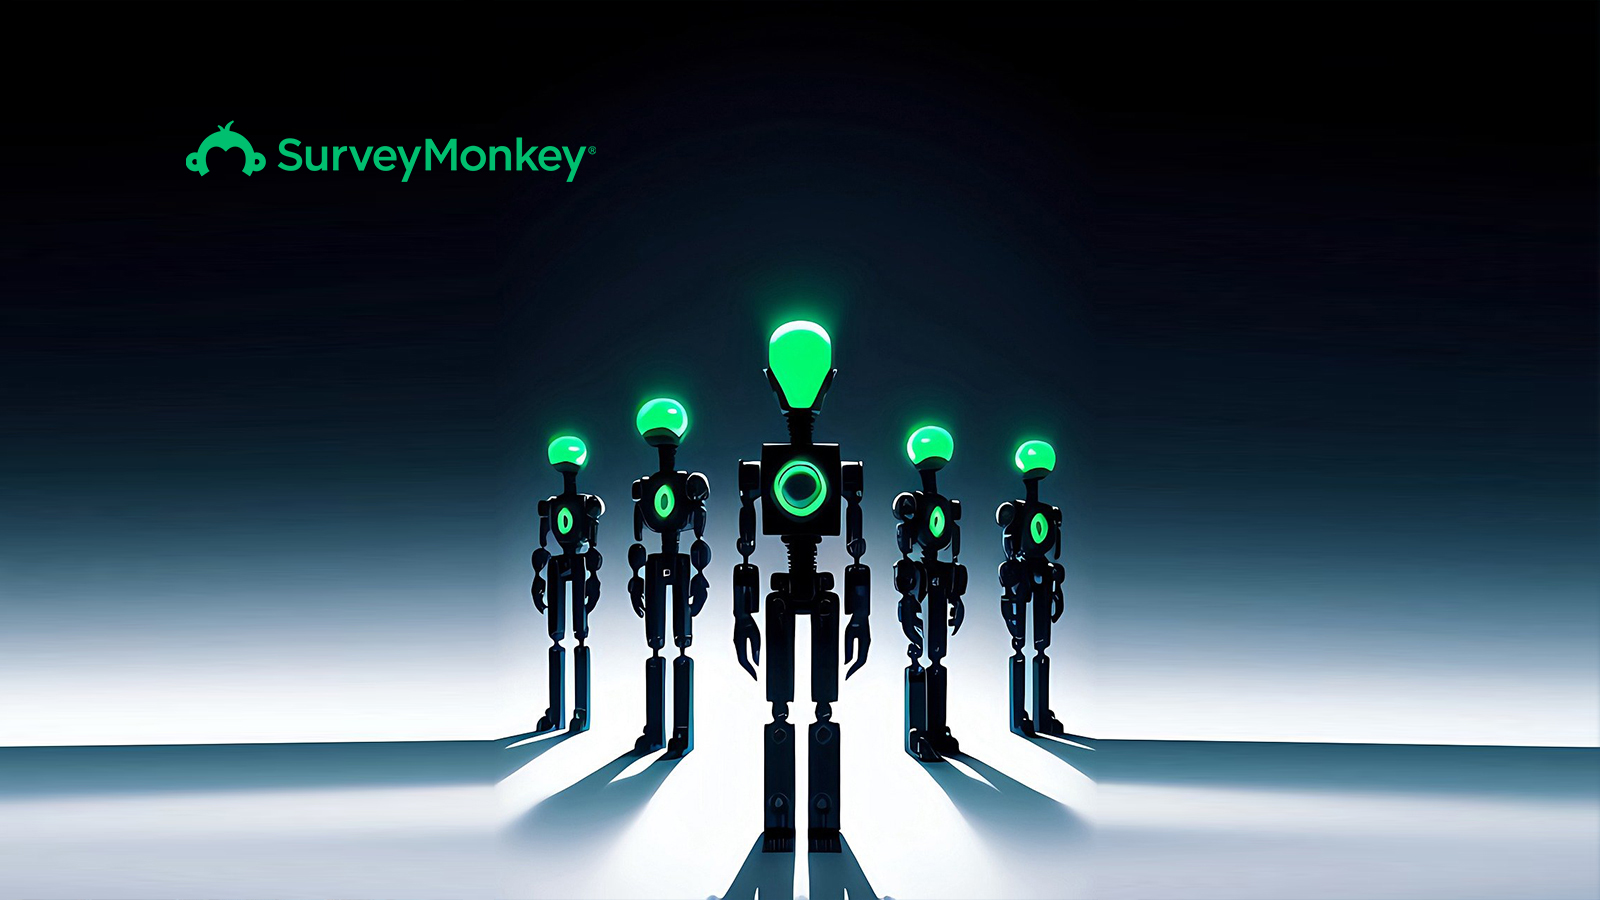 SurveyMonkey Announces New Trends in Business, Culture, and Social